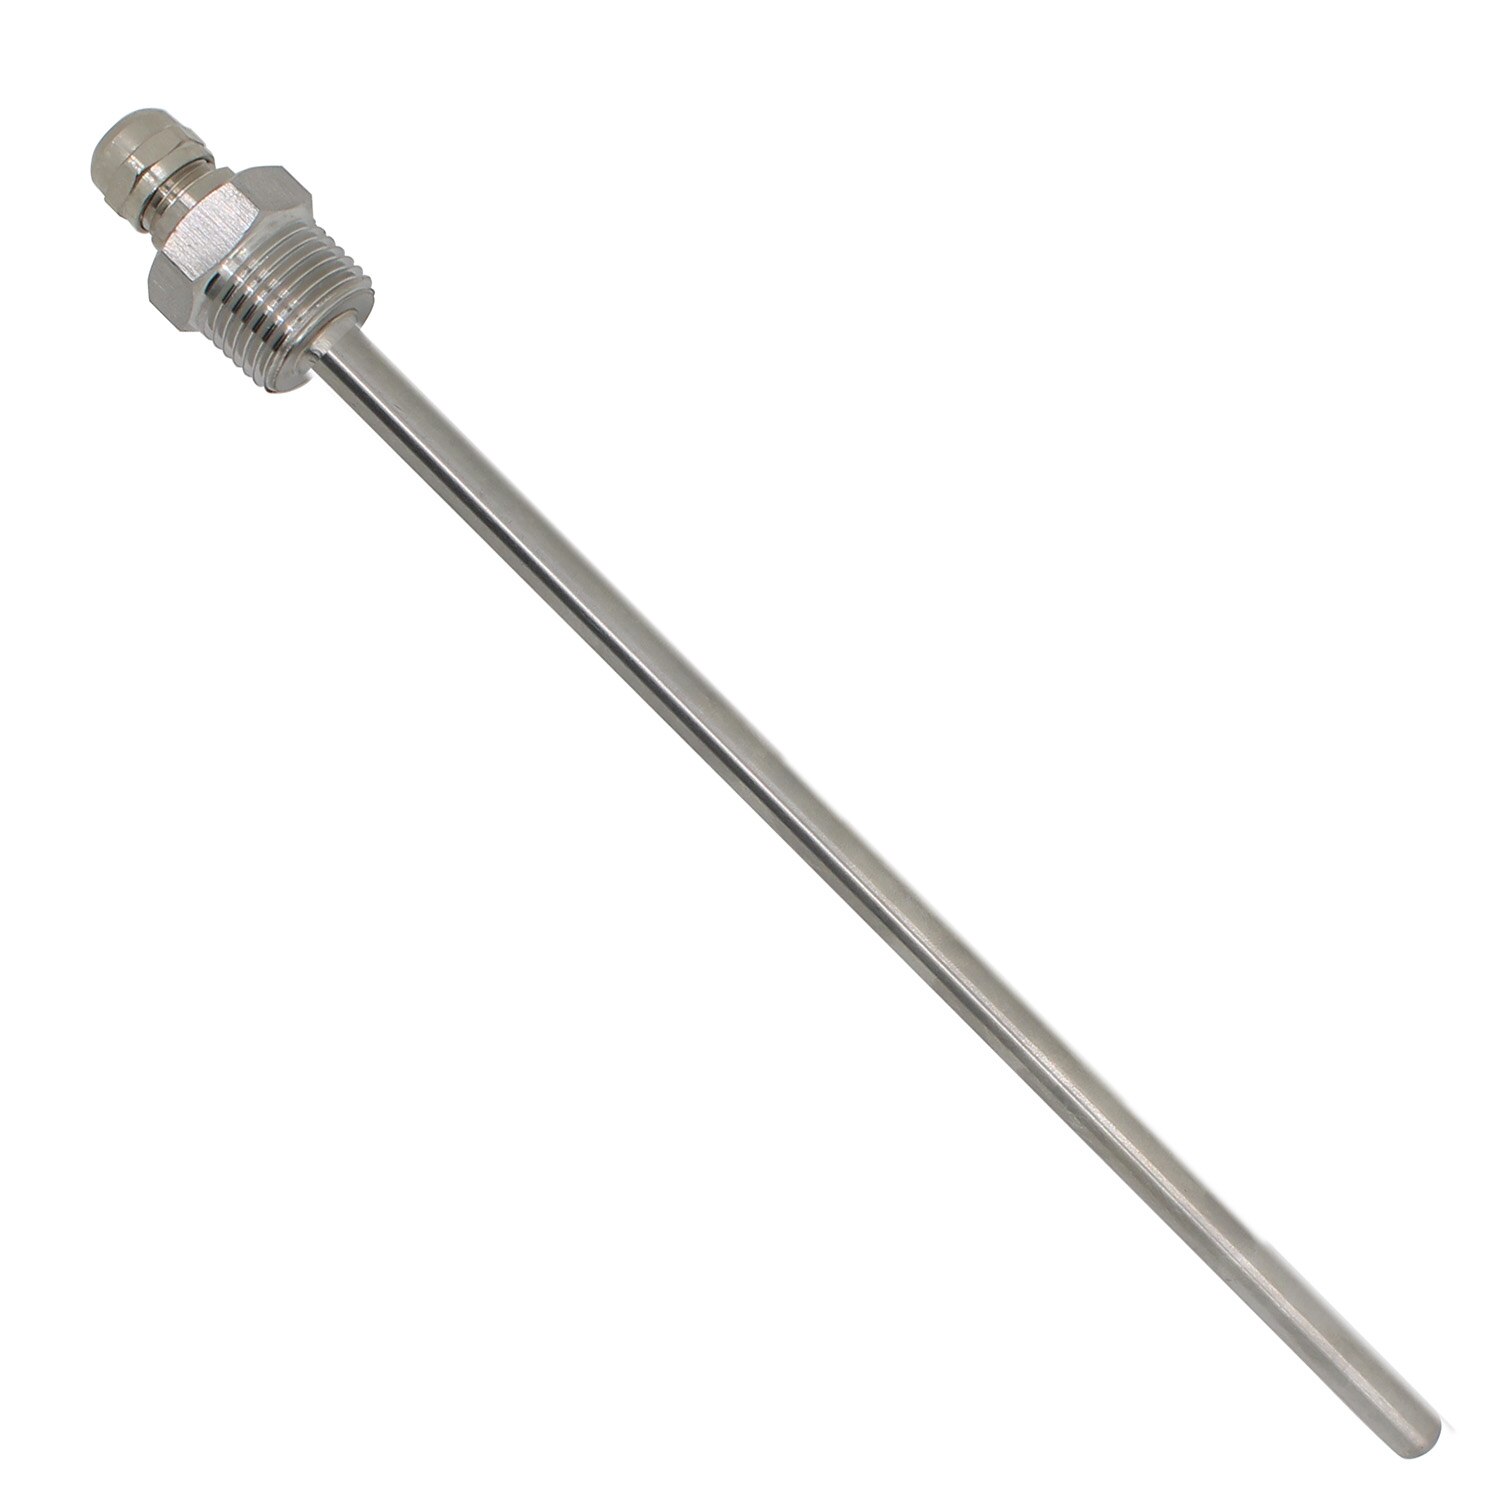 1/2 Inch-Weldless Thermowell 1/2 Roestvrij Staal Voor Thermometer Onderdompeling Van 30Mm 50Mm 100Mm 150Mm 200Mm 300Mm 400Mm 500Mm